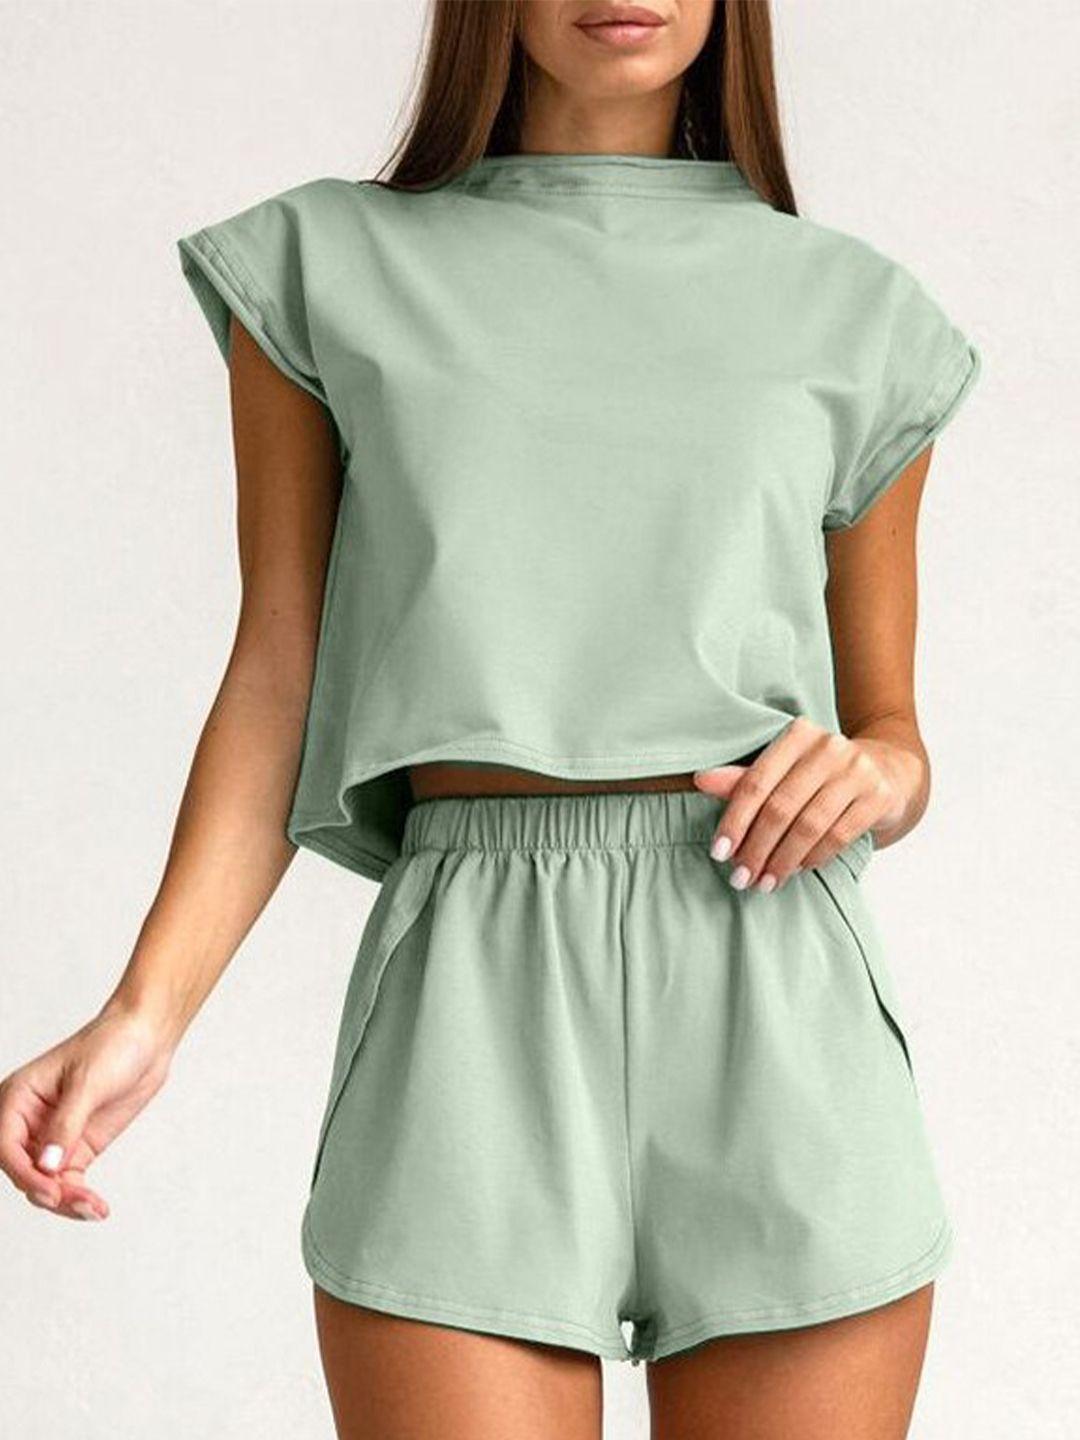 stylecast solid top and shorts set